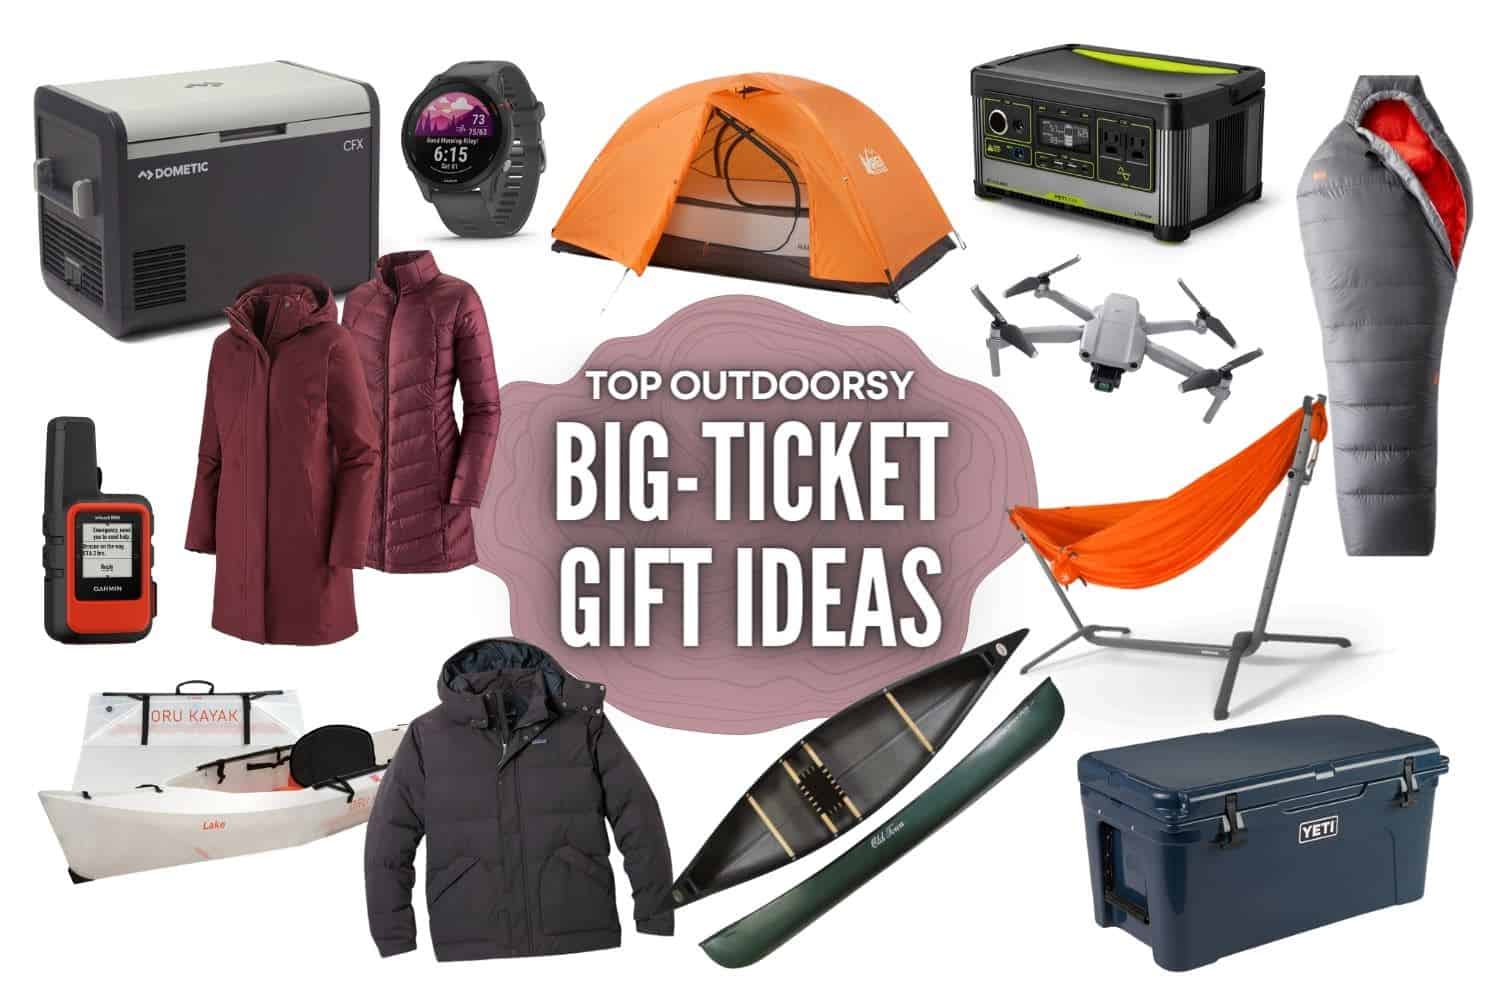 Big Ticket Gifts For Outdoor Adventure and Camping